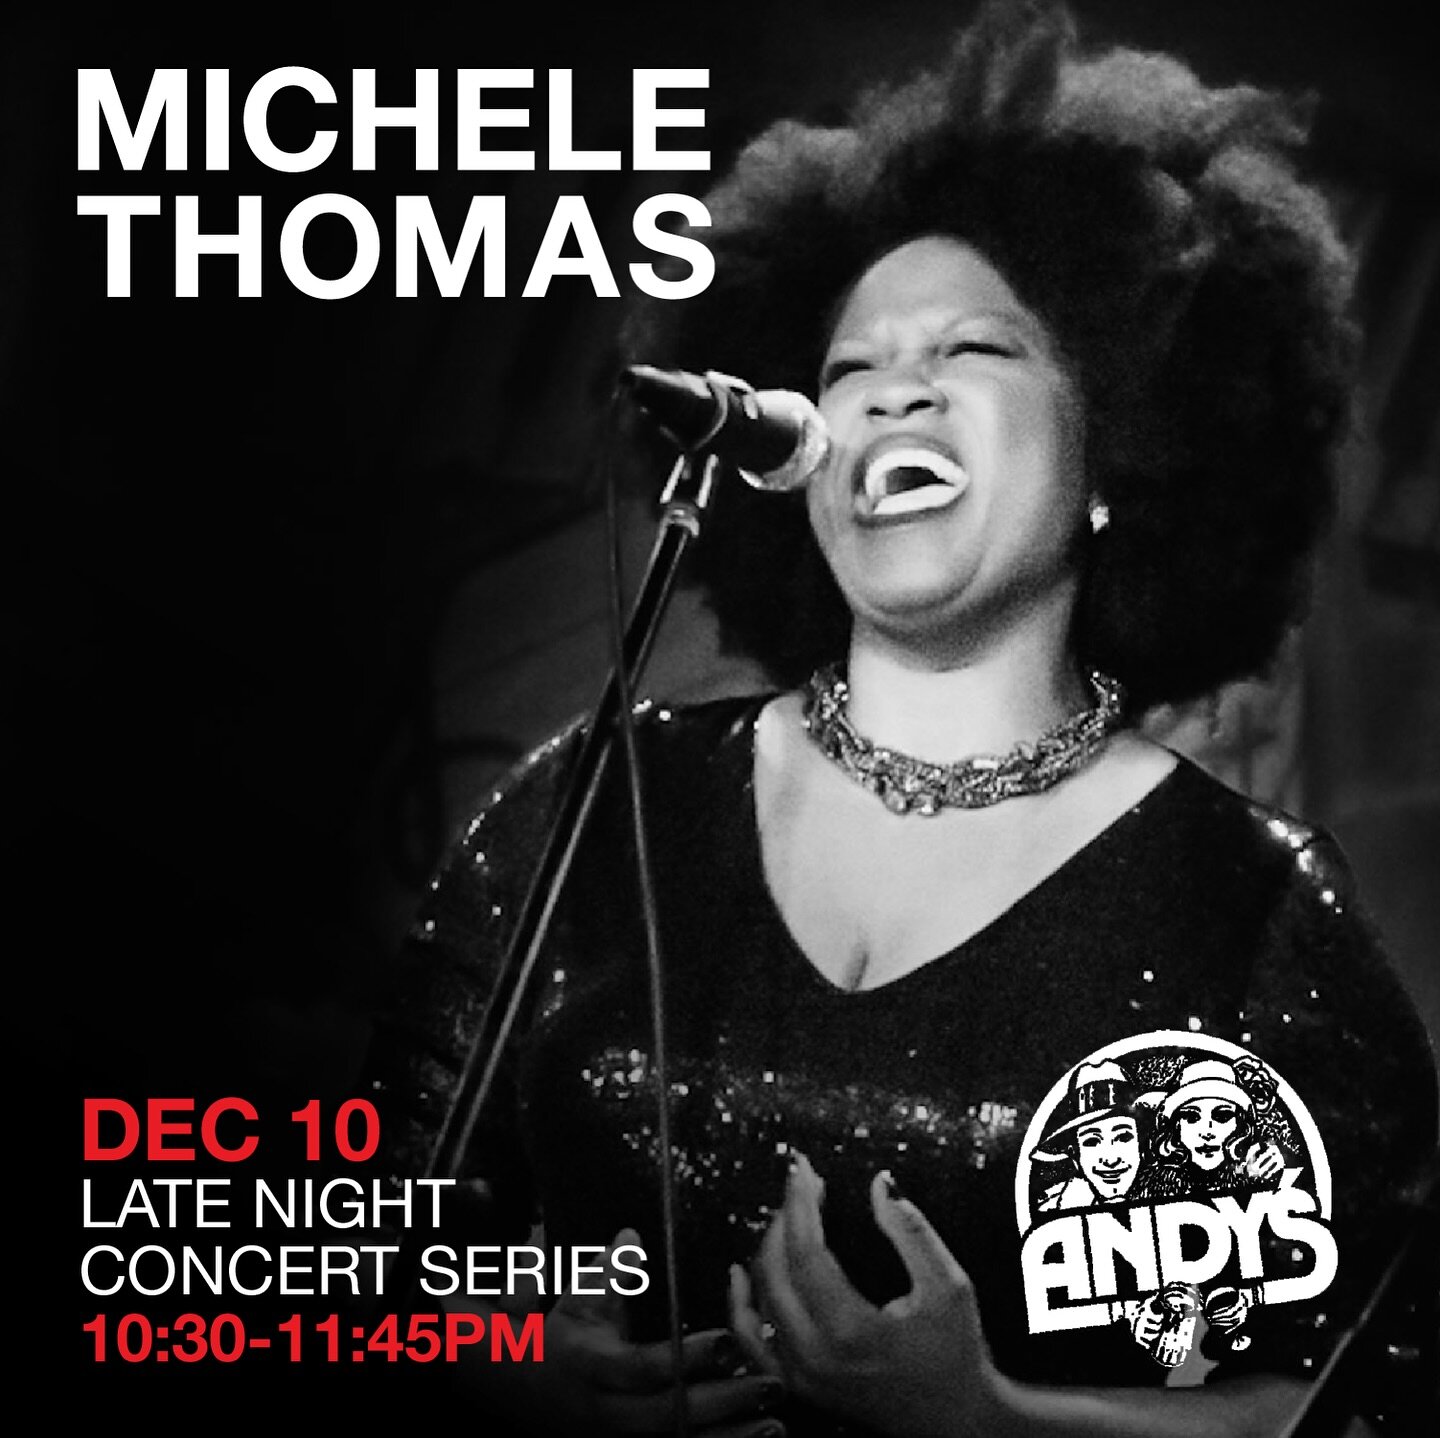 🎶 Join us for a night of jazz magic this Sunday, December 10, as the Michele Thomas Quartet takes the stage at Andy's Jazz Club for the Late Night Concert Series! 🌙 This marks our final show at Andy's for 2023, and we're ready to make it unforgetta